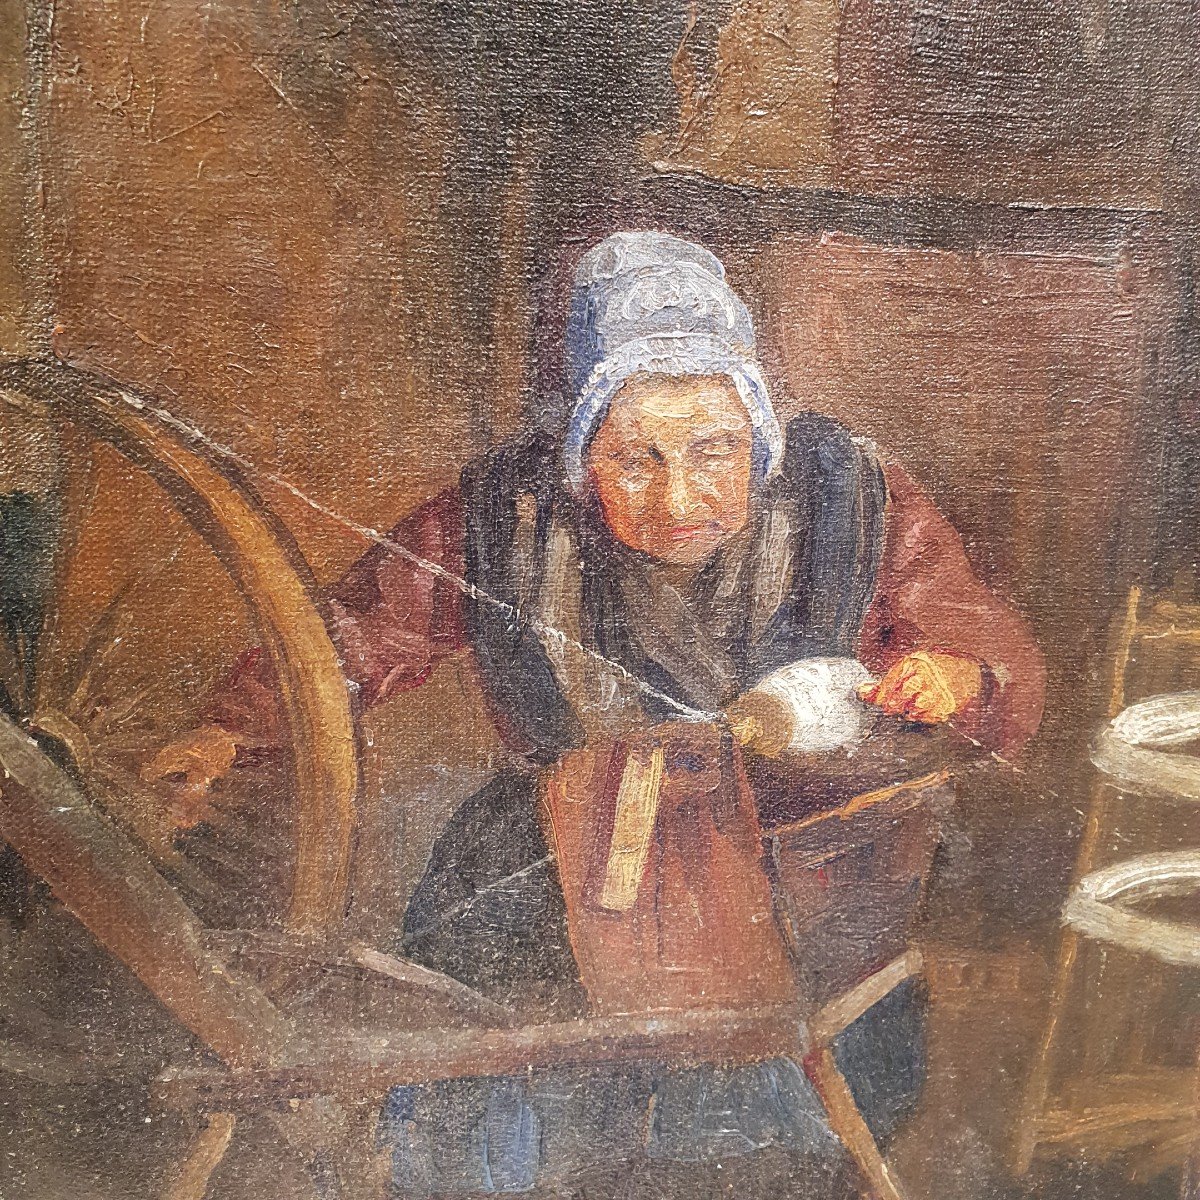 Spinner Painting, Country House Interior, 20th Century Peasantry